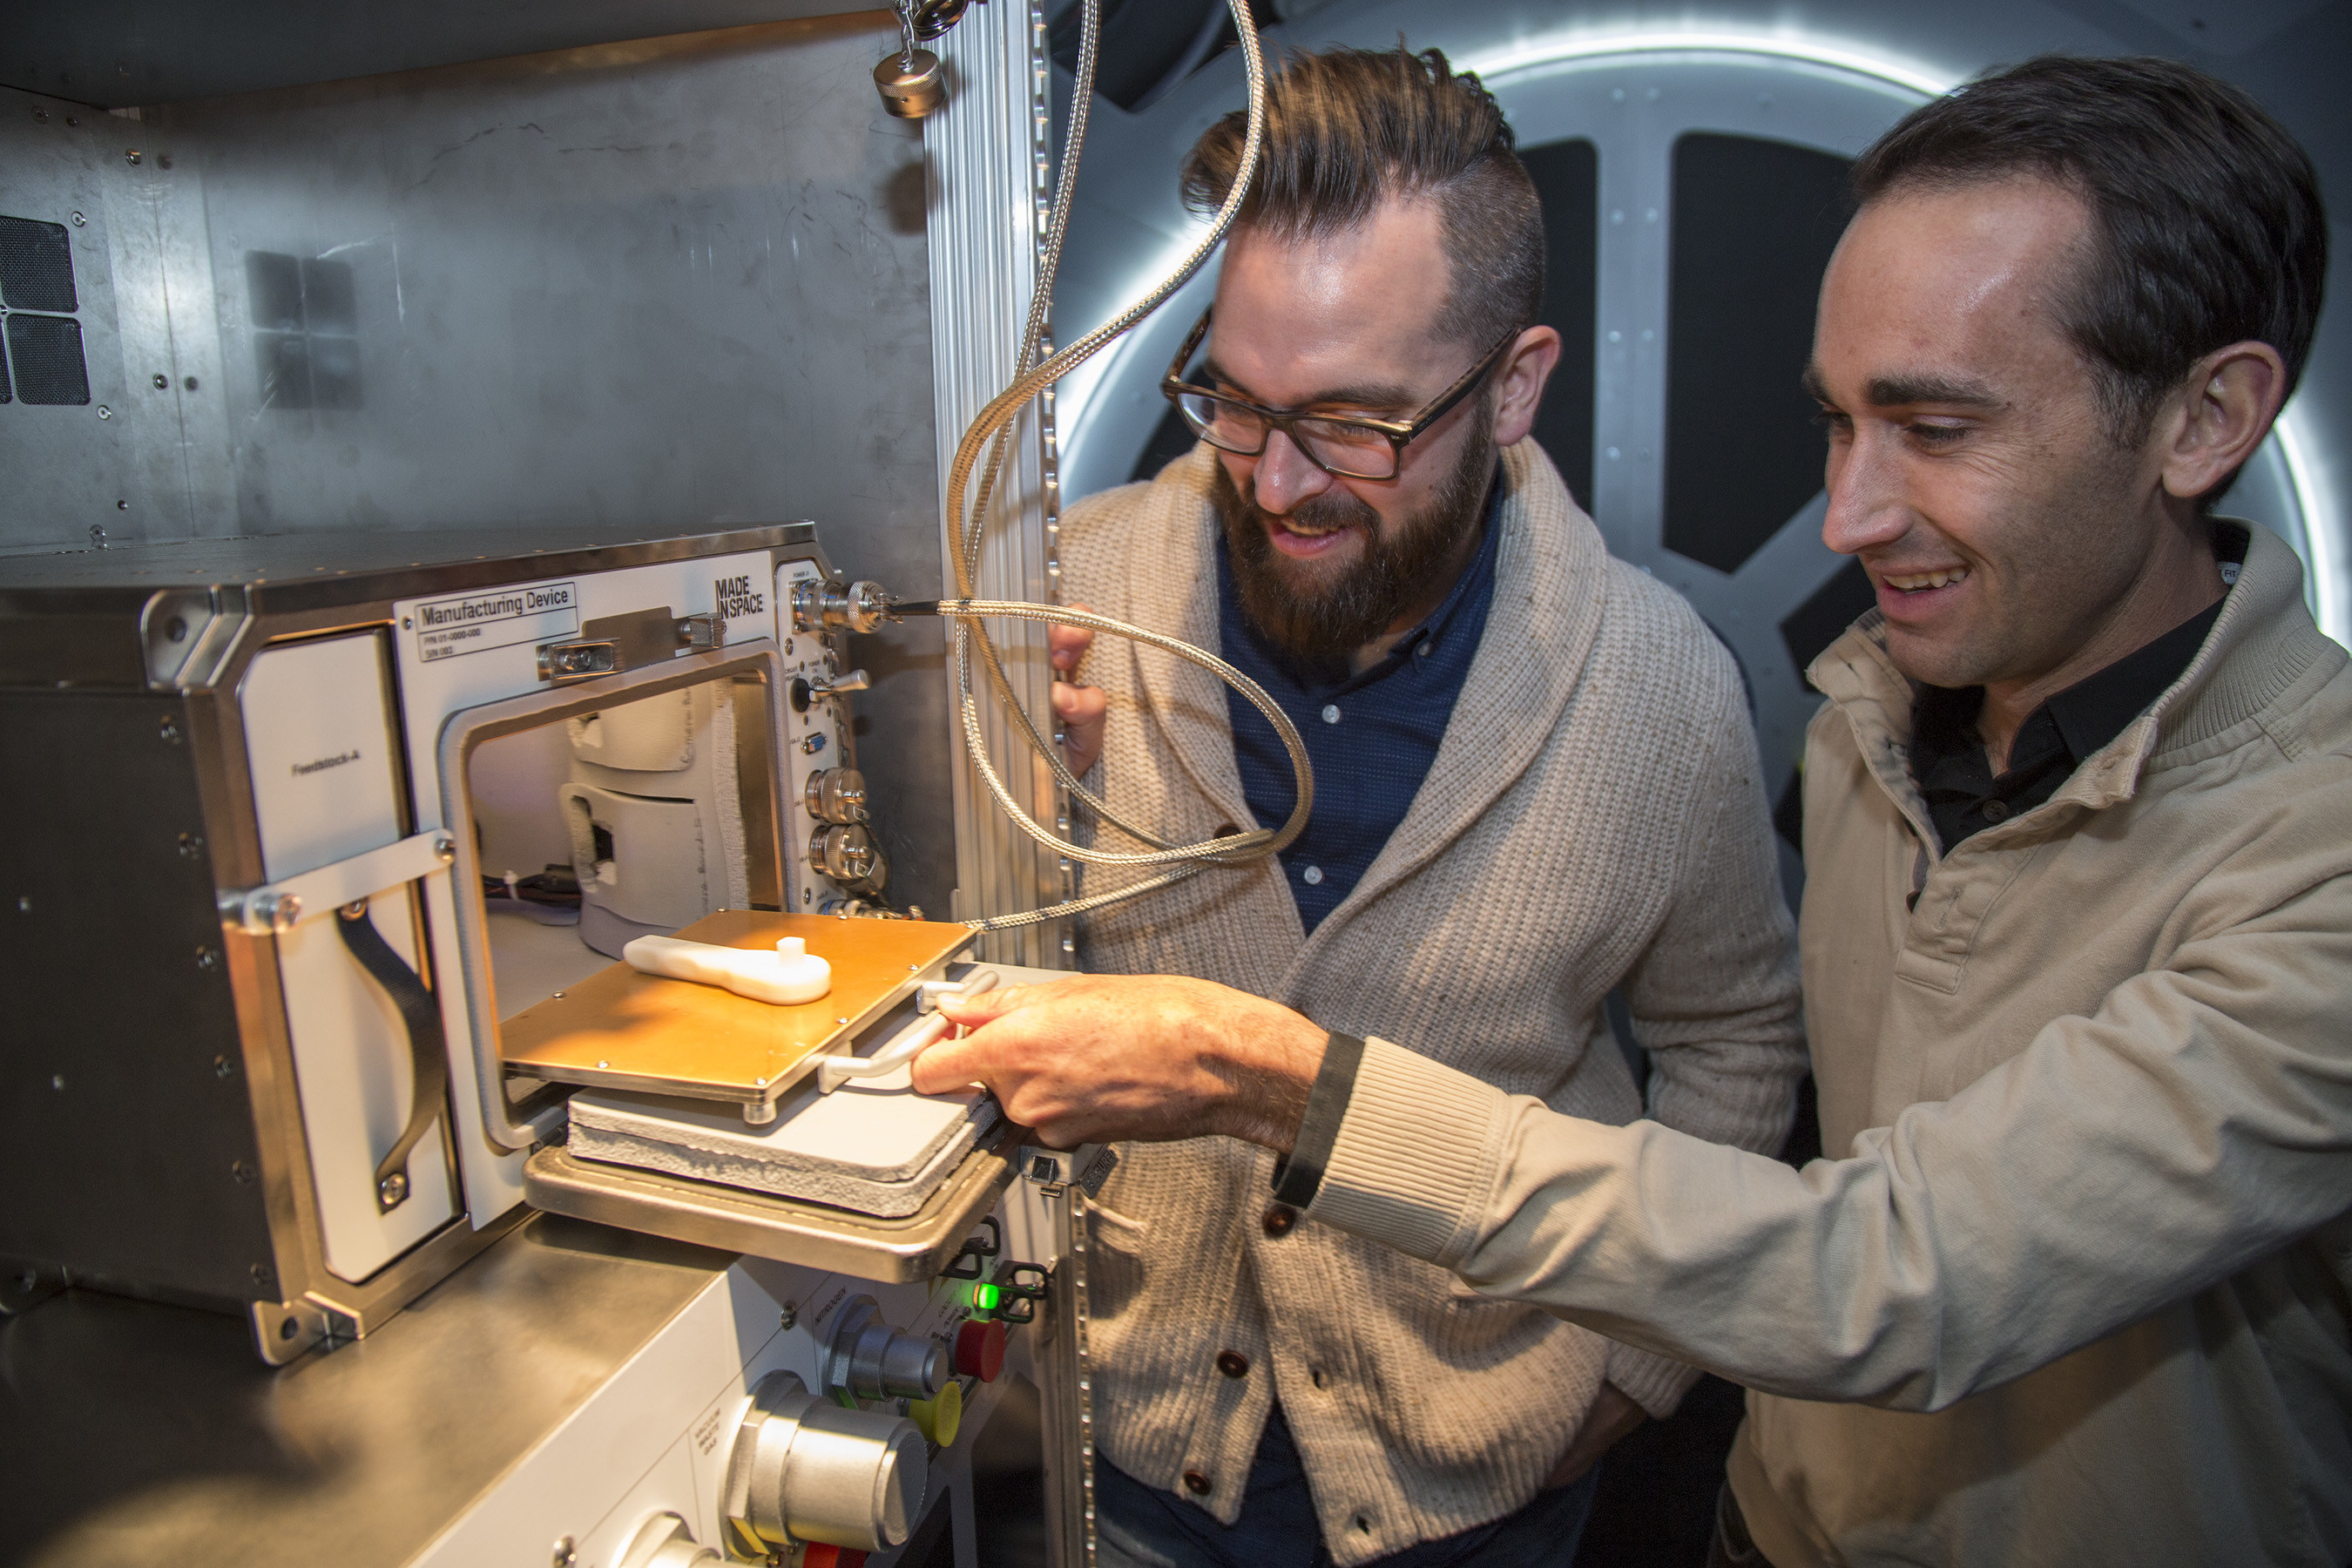 Kyle Nel, executive director, Lowe's Innovation Labs, left, and Jason Dunn, CTO and co-founder, Made in Space, examine a 3D printer in a mock-up of the International Space Station (ISS) in New York on Wednesday, October 28, 2015. Lowe's Innovation Labs (http://www.lowesinnovationlabs.com), the disruptive innovation hub of Lowe's Companies, Inc., has partnered with aerospace company Made in Space, to become the first to launch a commercial 3D printer to space.  The printer, the first permanent additive manufacturing facility for the ISS, will bring tools and technology to astronauts in space.